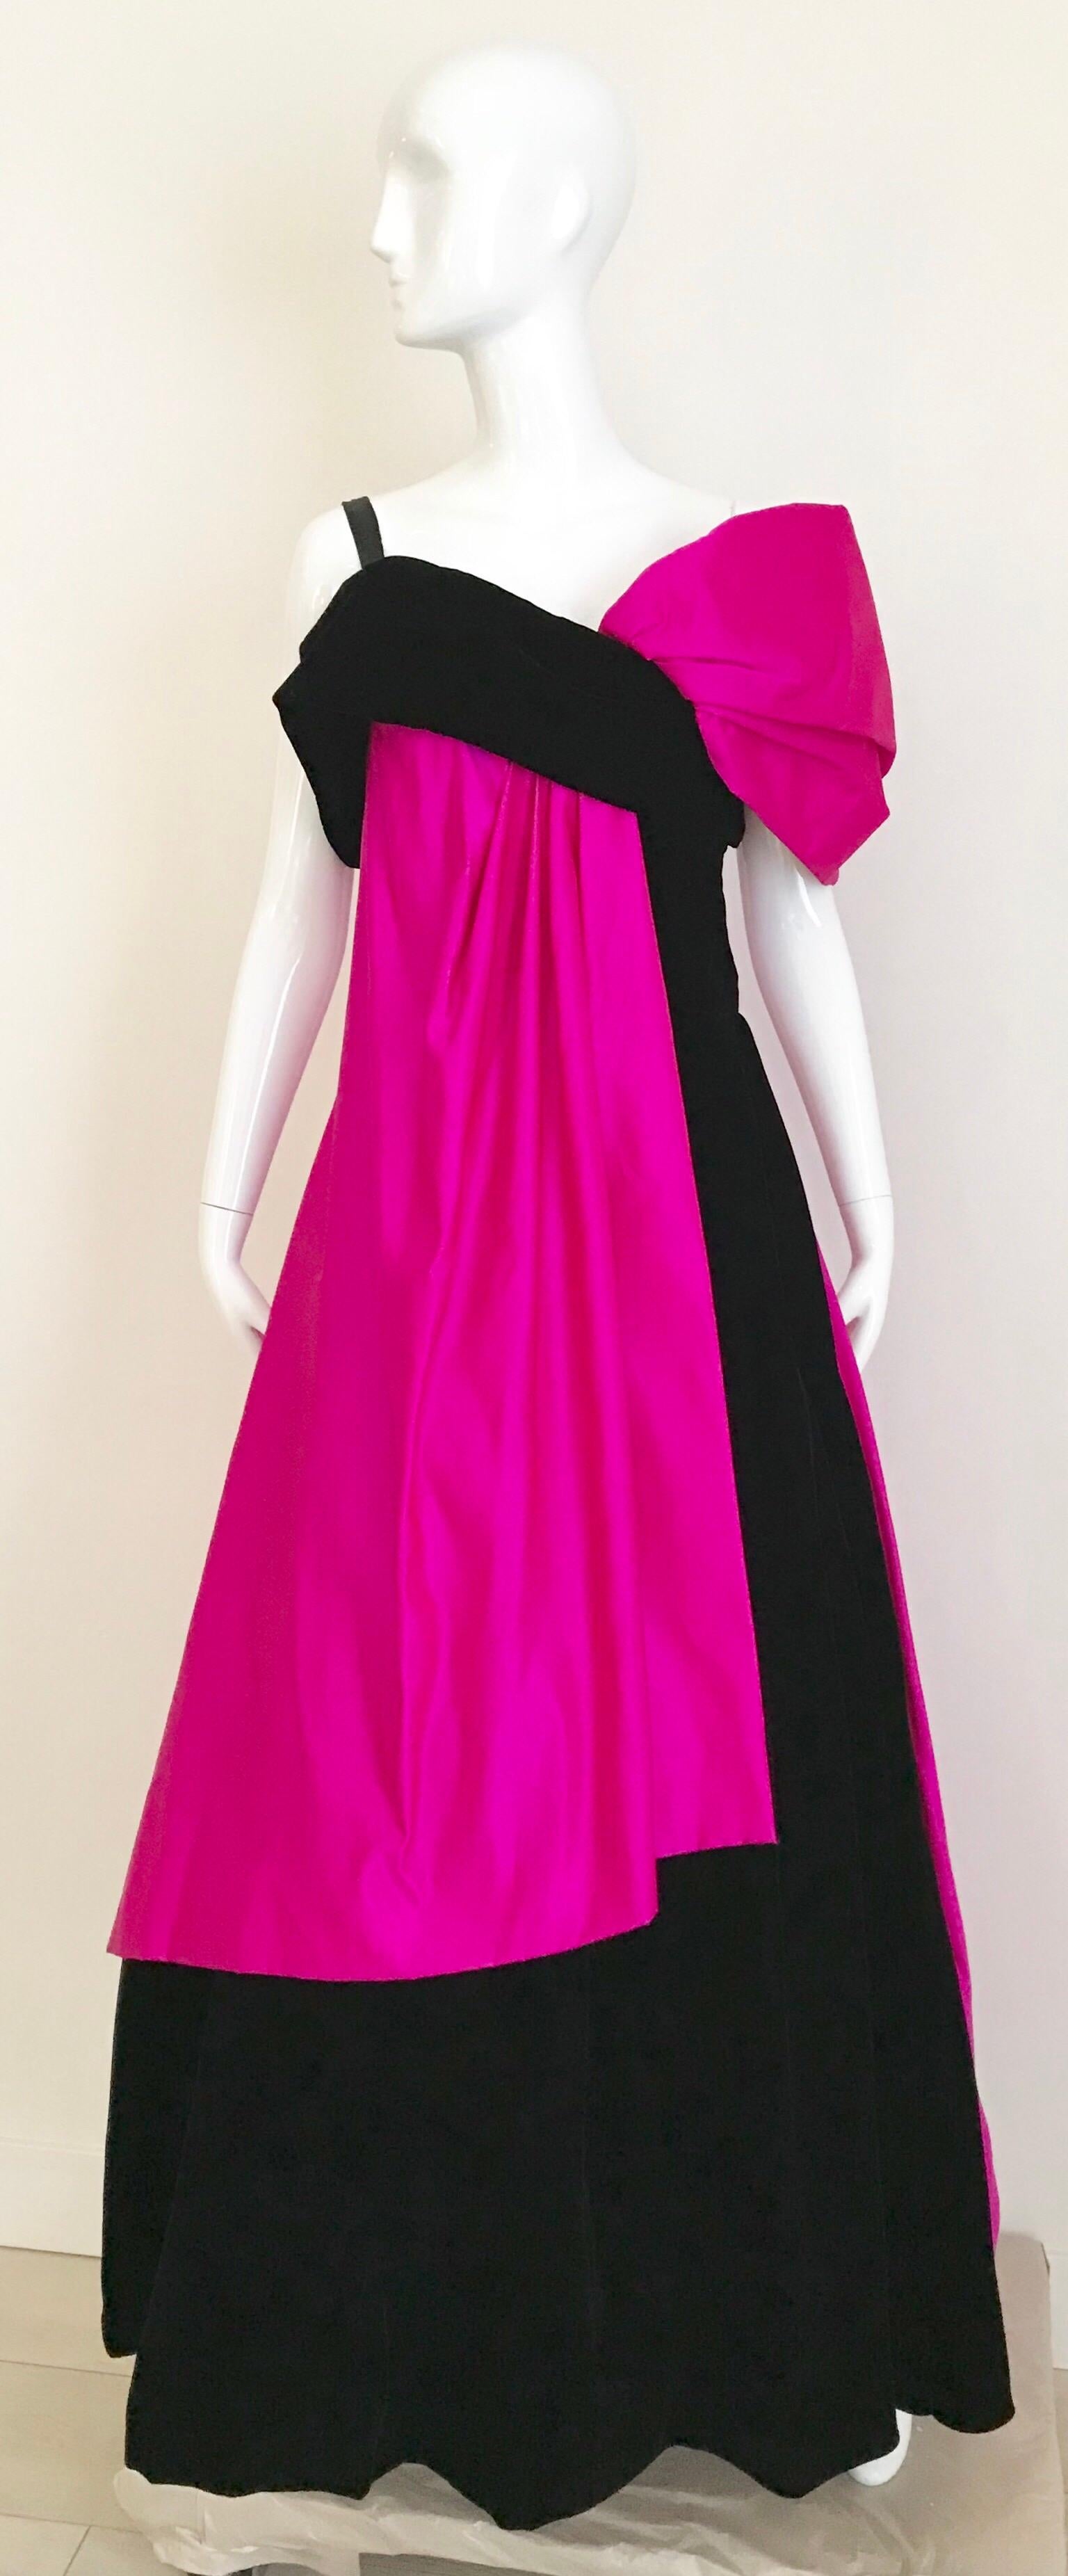 Late 80s/ early 90s Arnold Scaasi Hot pink and black velvet gown with exaggerated shoulder.
Perfect for elegant evening black tie party! Multiple layers of black tulle underneath. 
Gown is lined in silk. 
Size: Small - Medium
Measurement: Bust: 34